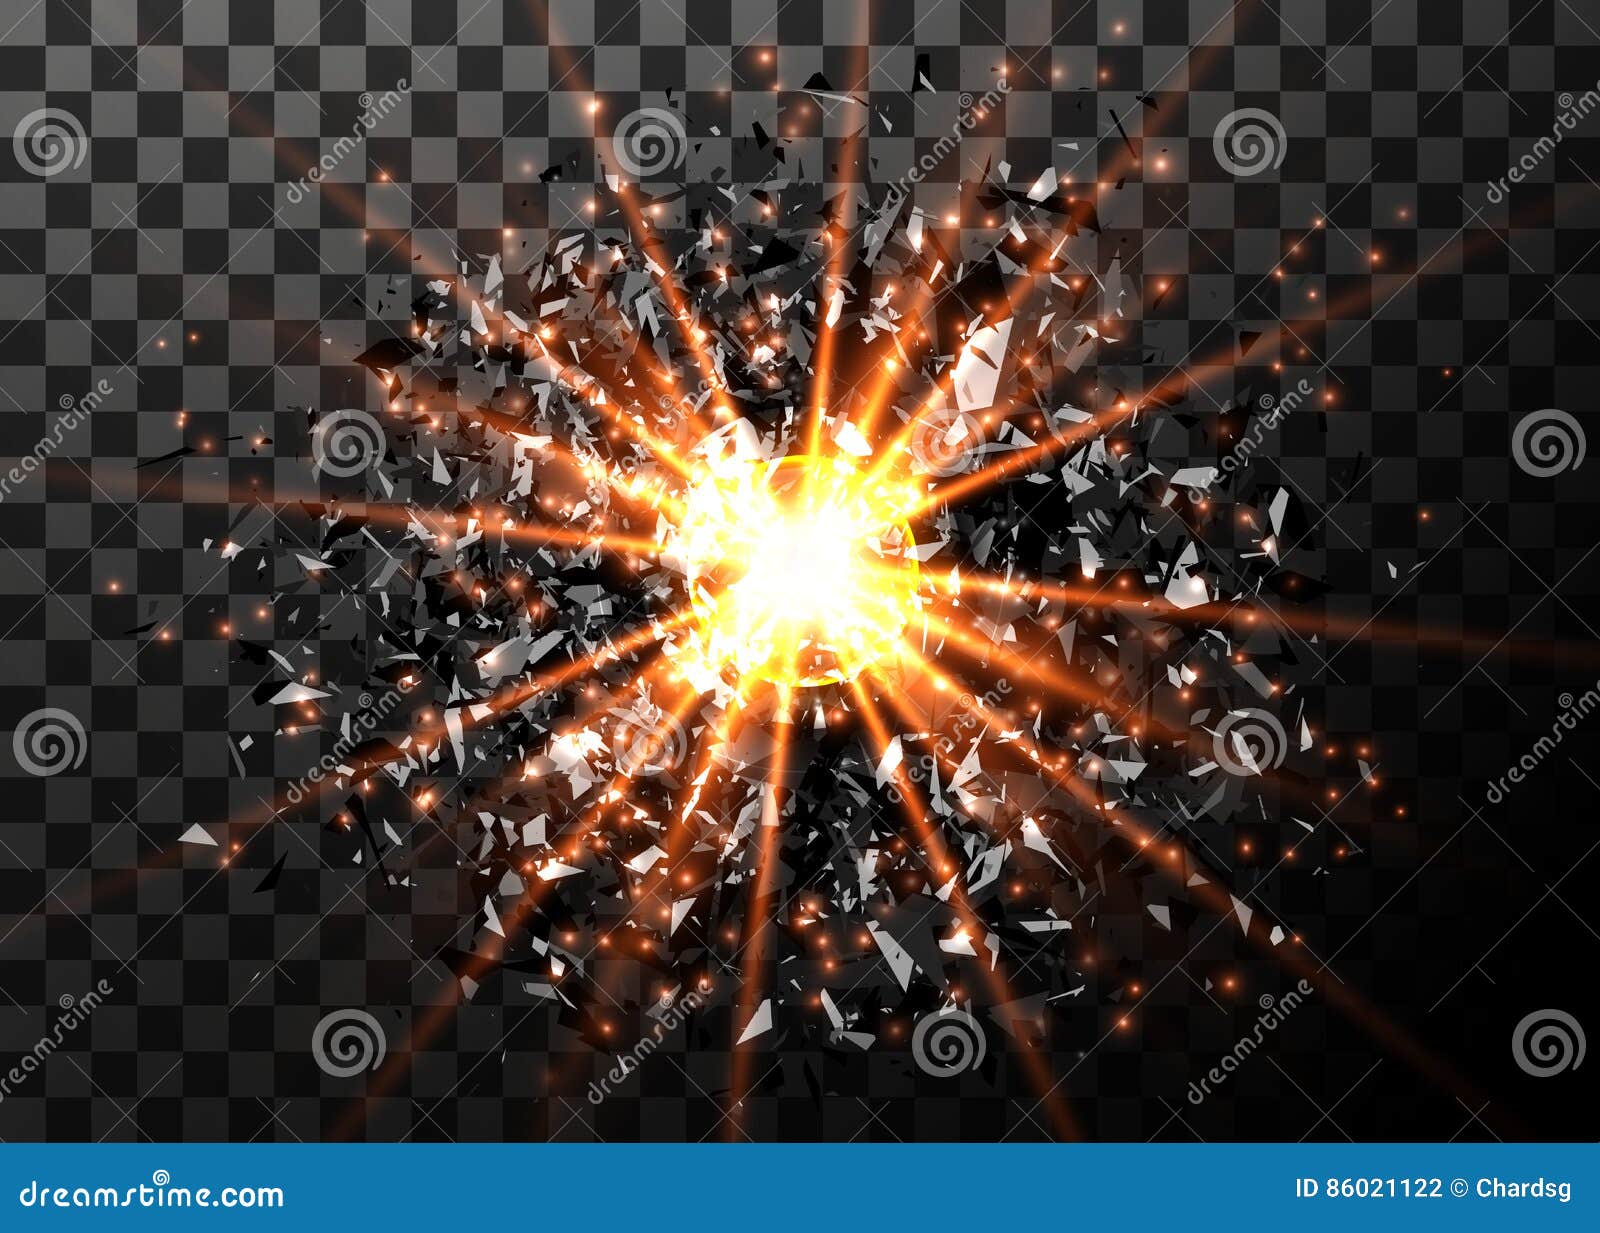  abstract explosion background. bright blast in dark. glowing bright light. digital graphic for brochure, website